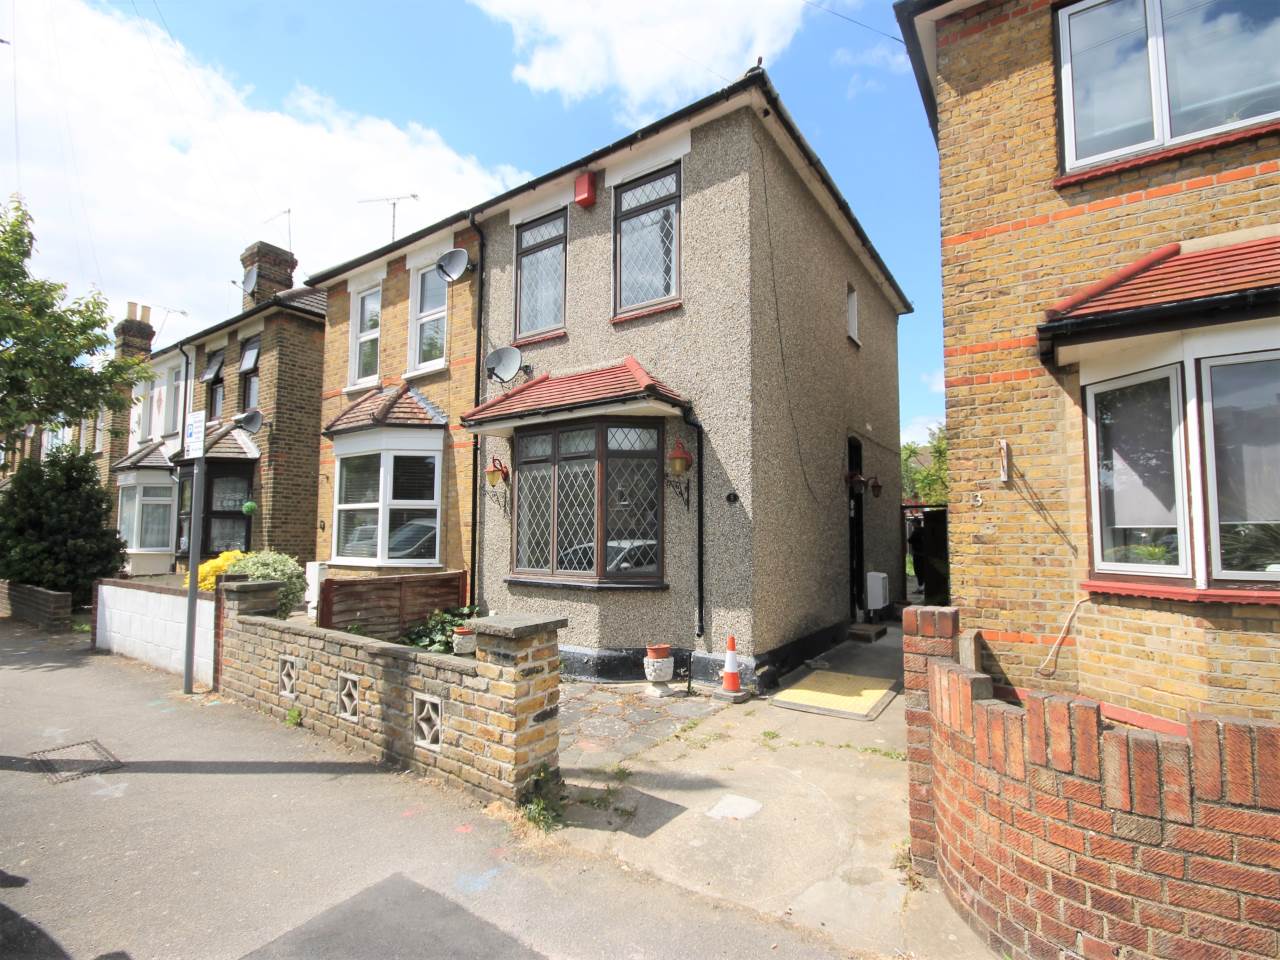 2 bed house to rent in Honinton Road, Romford, RM7 